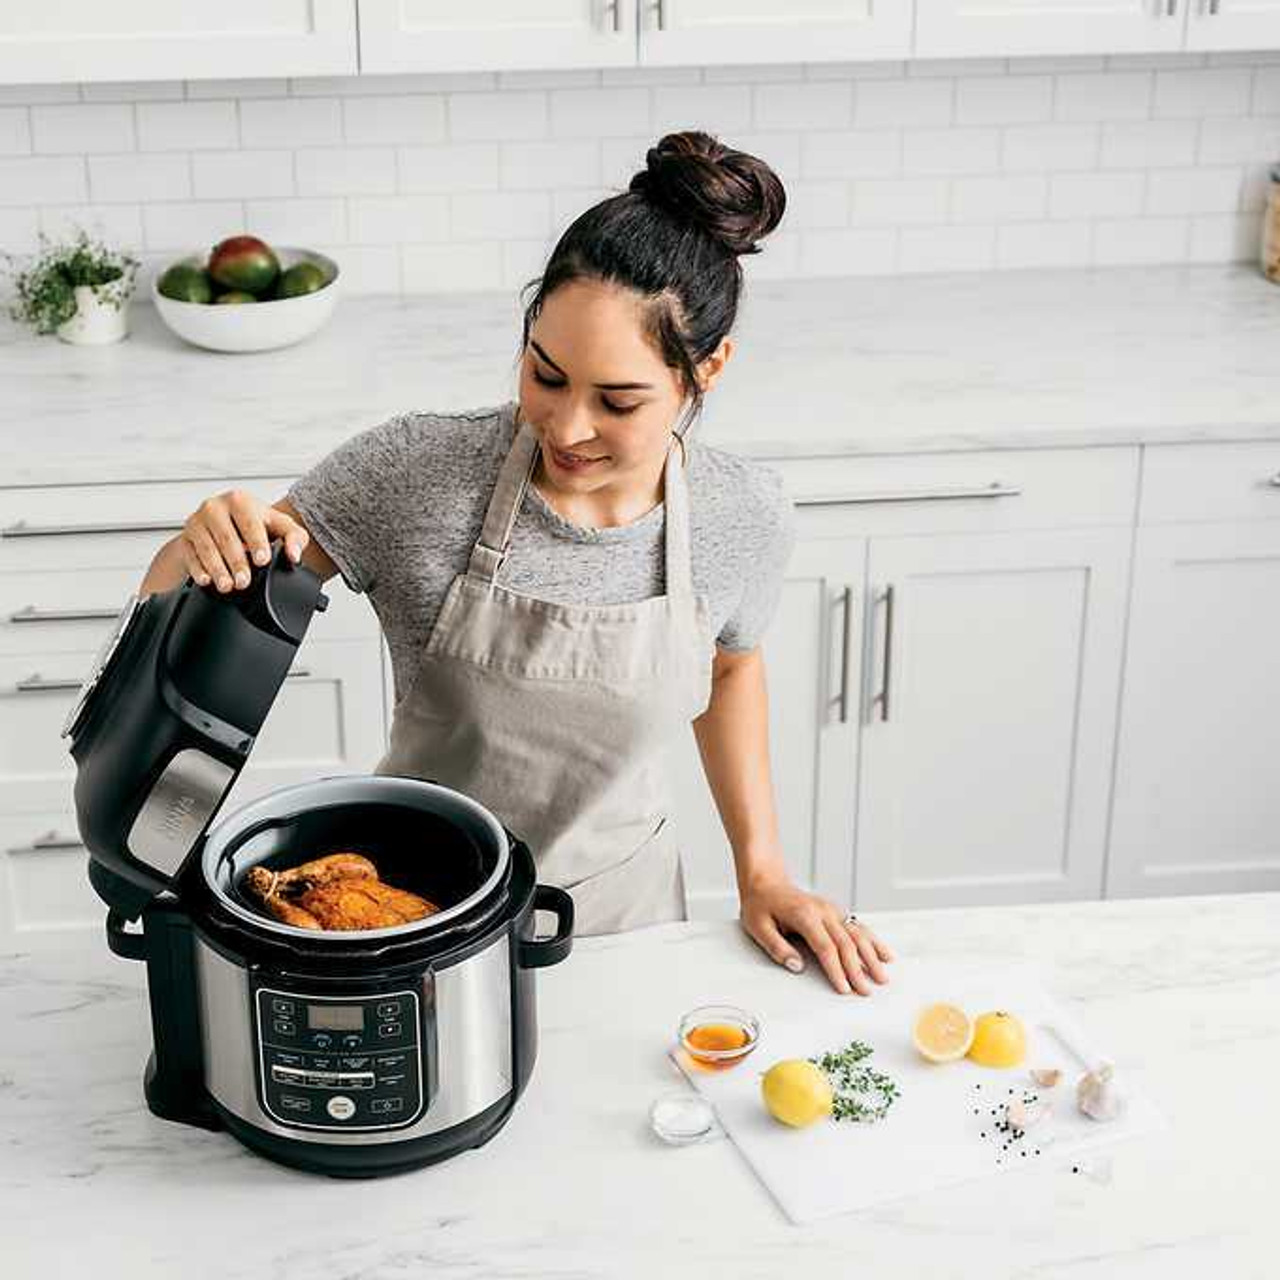 https://cdn11.bigcommerce.com/s-g5ygv2at8j/images/stencil/1280x1280/products/13771/22571/Ninja-Foodi-10-in-1-76-L-8-qt-Pressure-Cooker-Air-Fryer-Multicooker-Stainless-steel-A2ZCHEF-Chicken-Pieces_22570__35108.1667896811.jpg?c=1